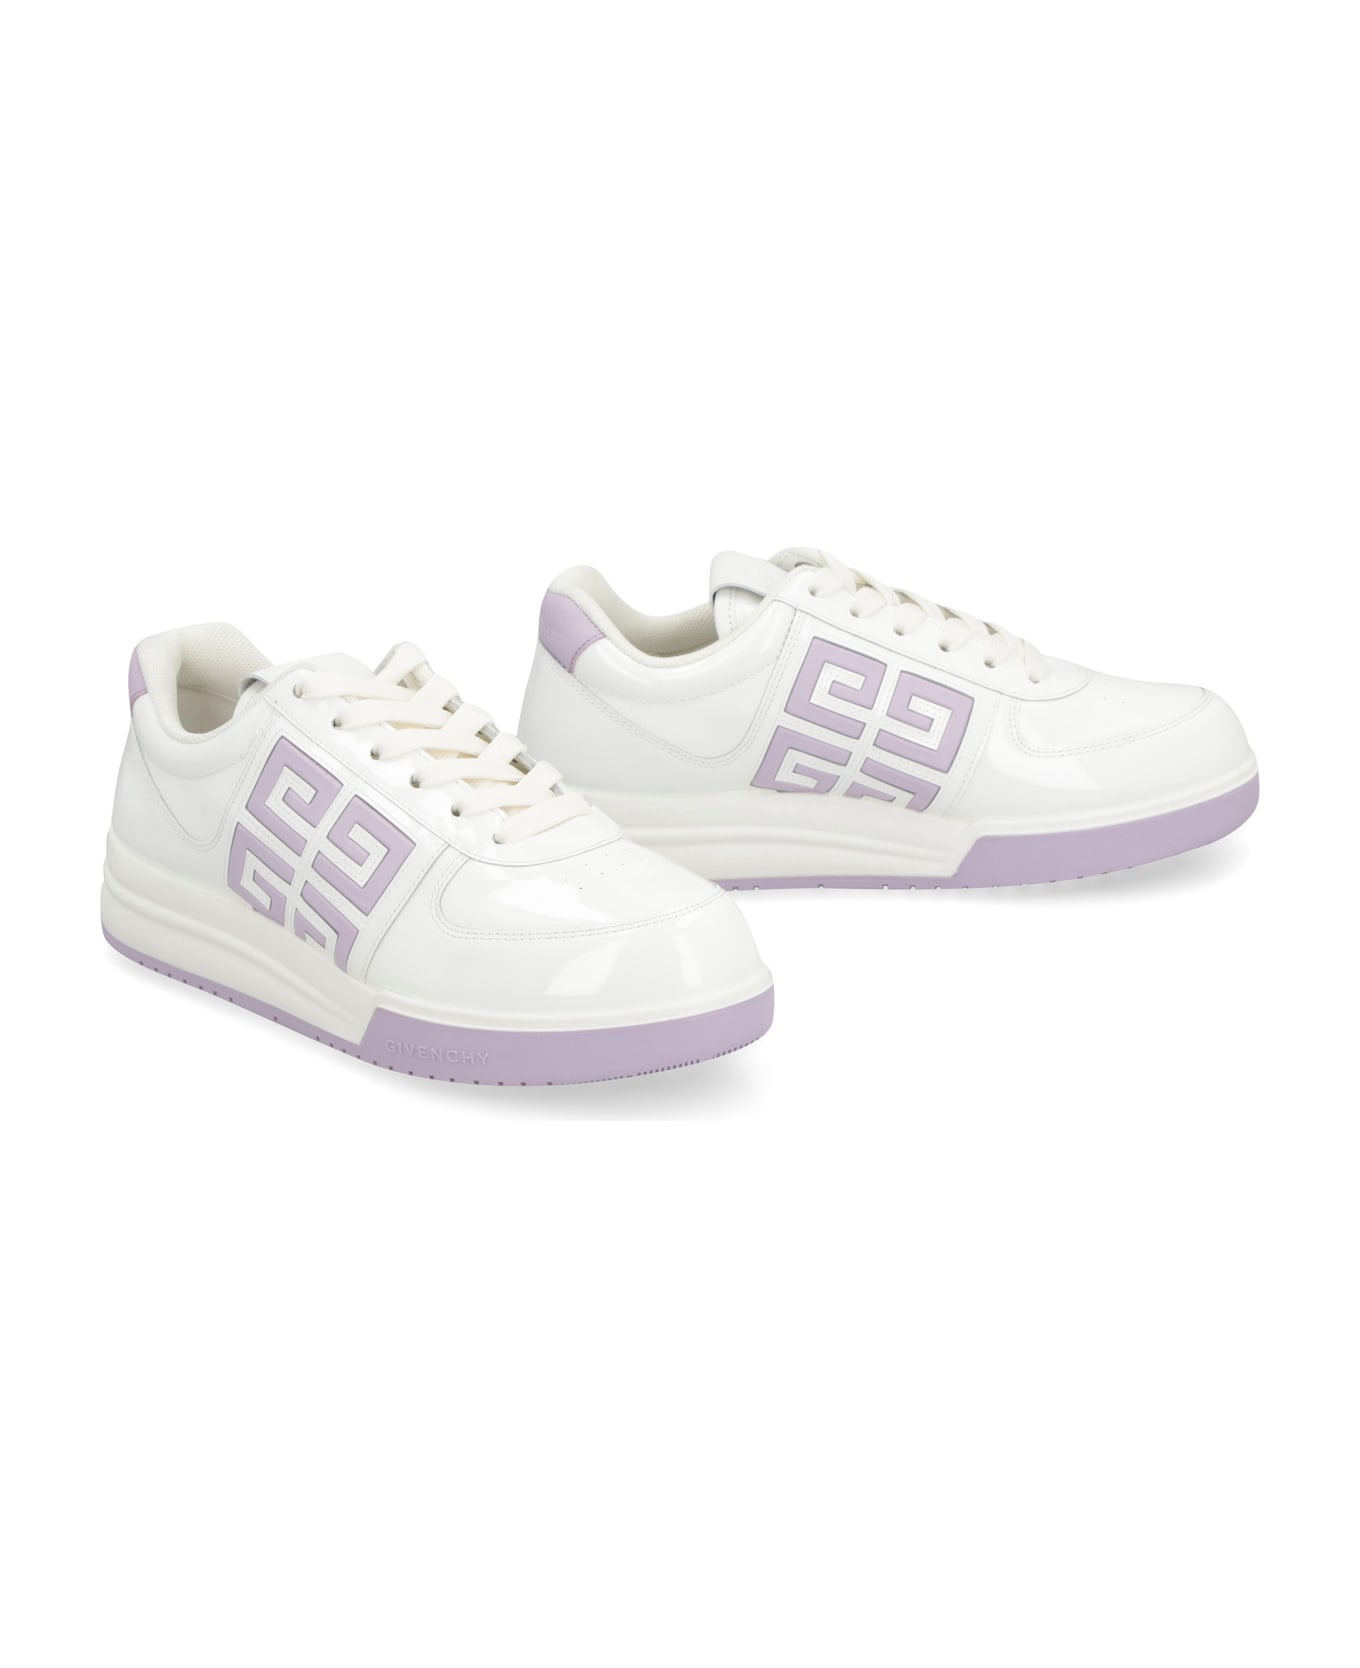 Givenchy G4 Leather Sneakers - White